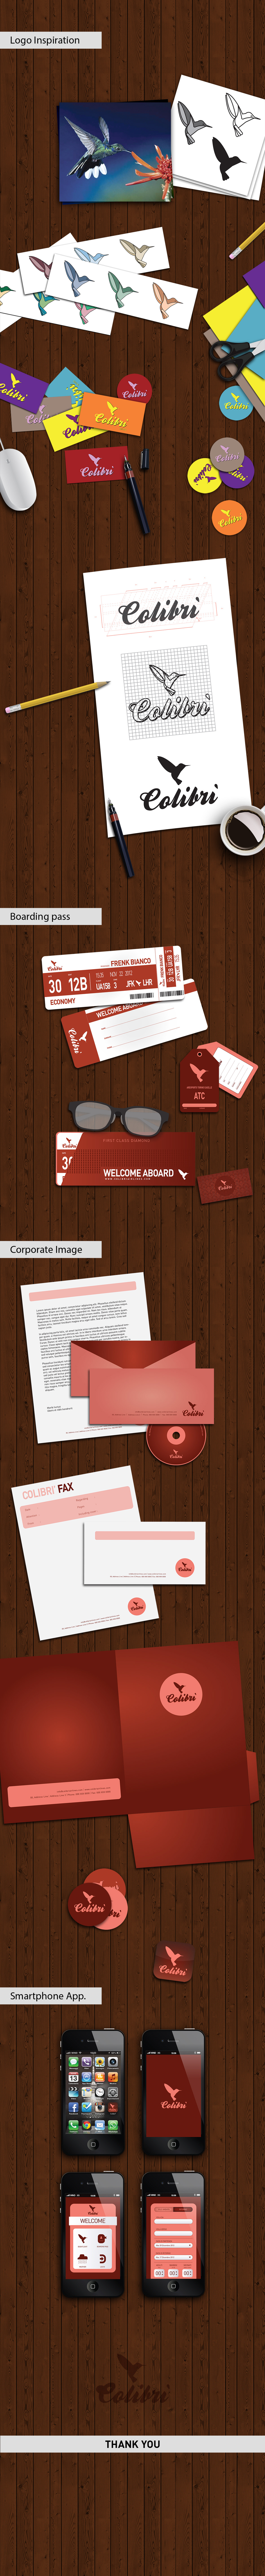 Boarding Pass vintage identity corporate image Fly plane Airlines company logo